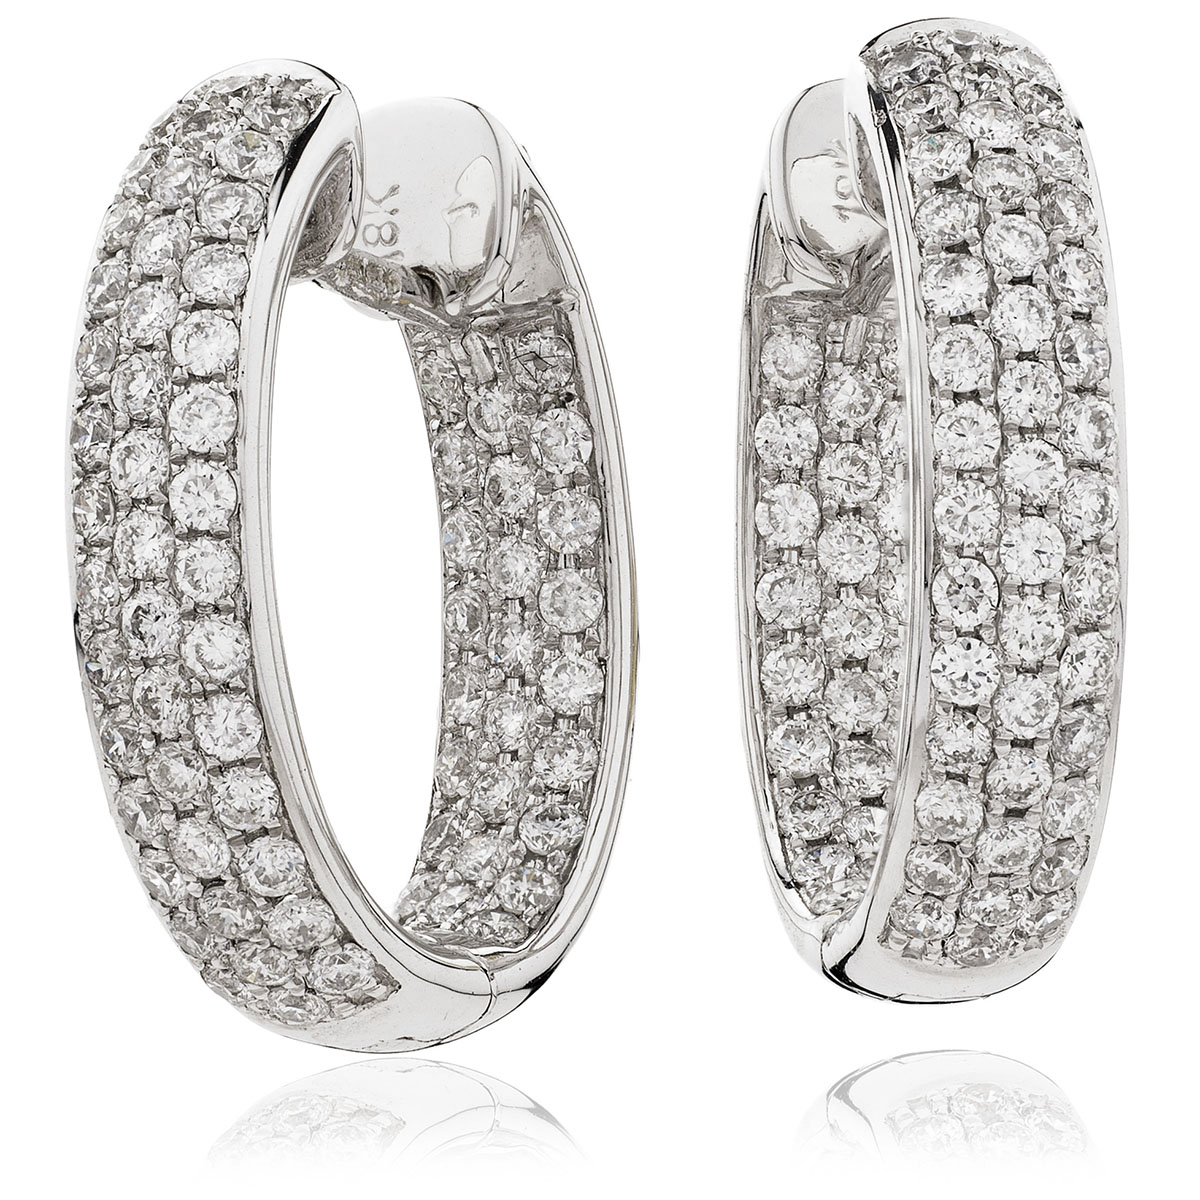 3 Row Pave In And Out Diamond Hoops Earrings